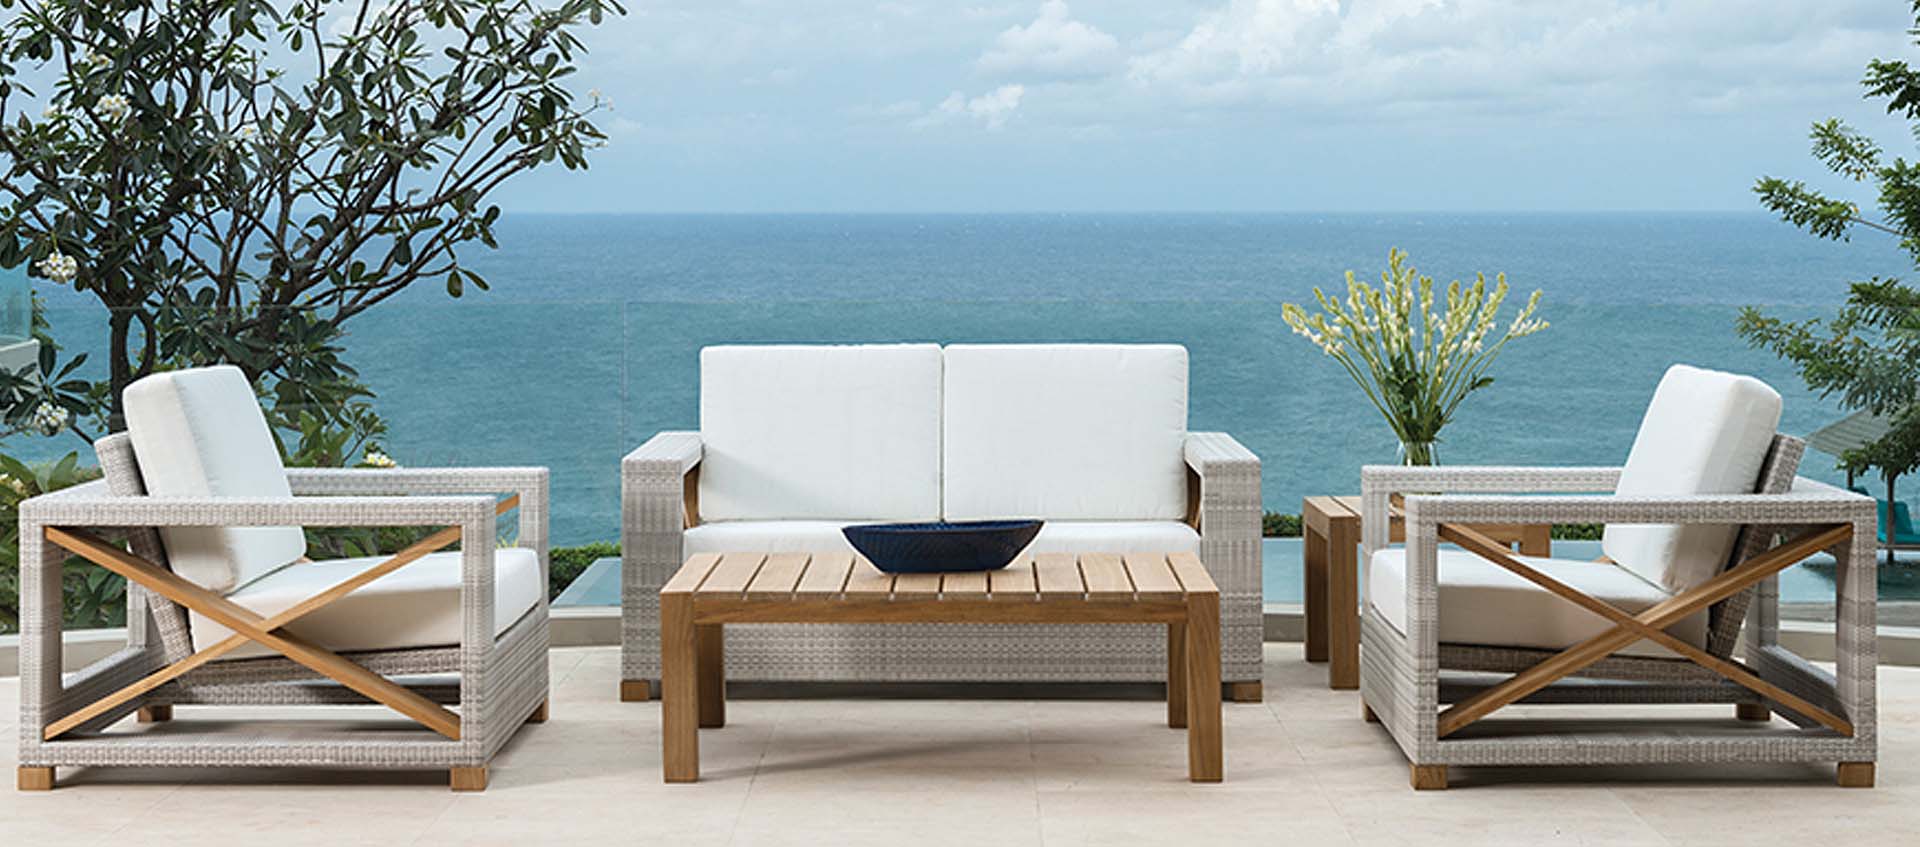 All American Outdoor Living Patio Furniture